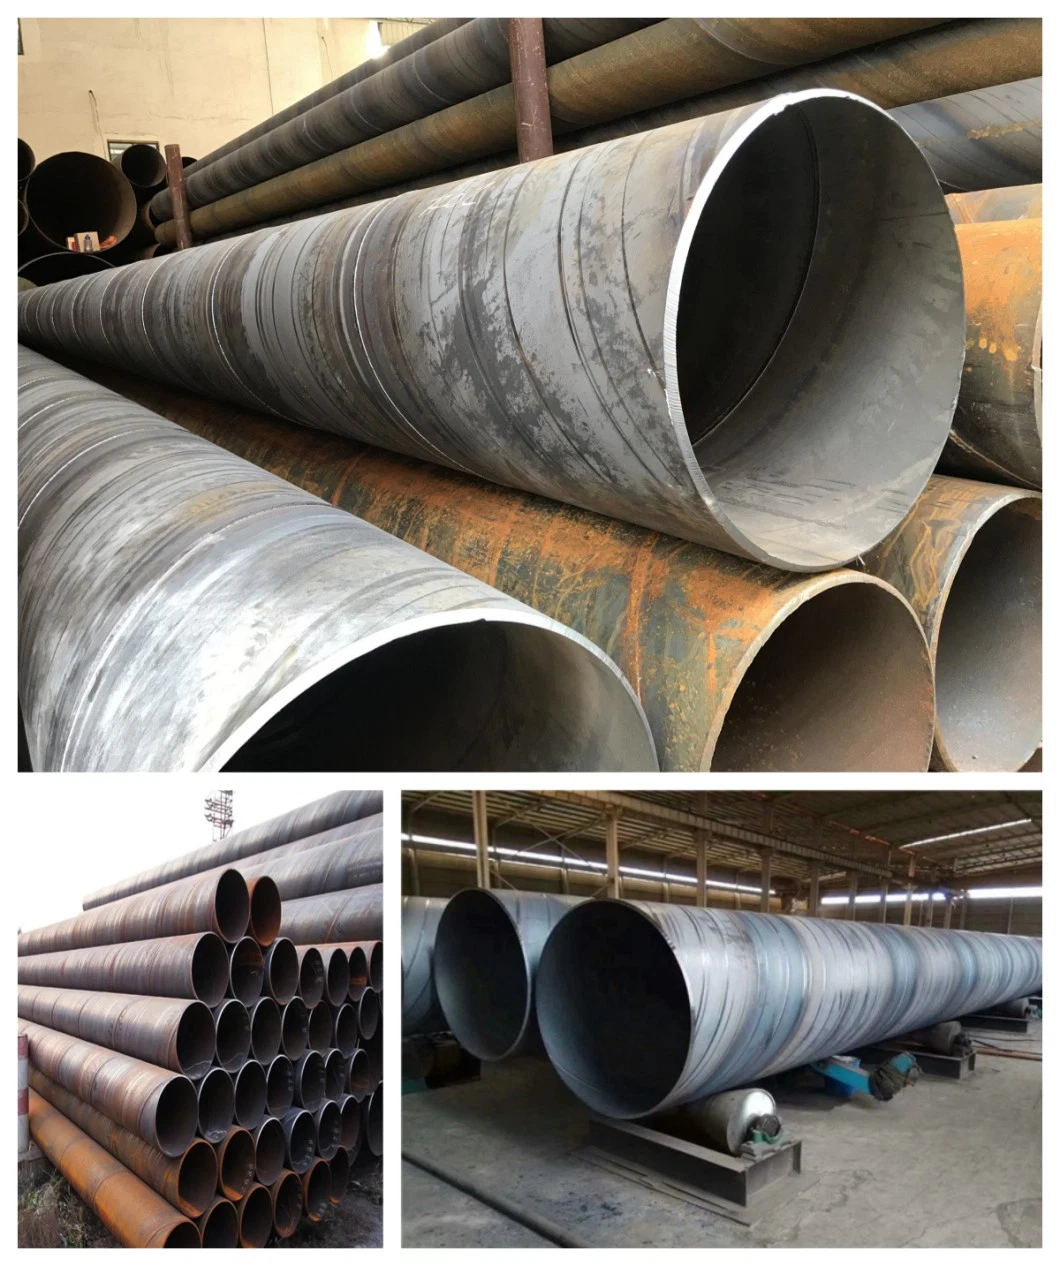 SSAW Spiral Carbon Steel Pipe ASTM A252 API 5L As1163 C350, API 5CT, Sy/T5037, Sy/T5040 Carbon Welded Seamless Spiral Steel Pipe